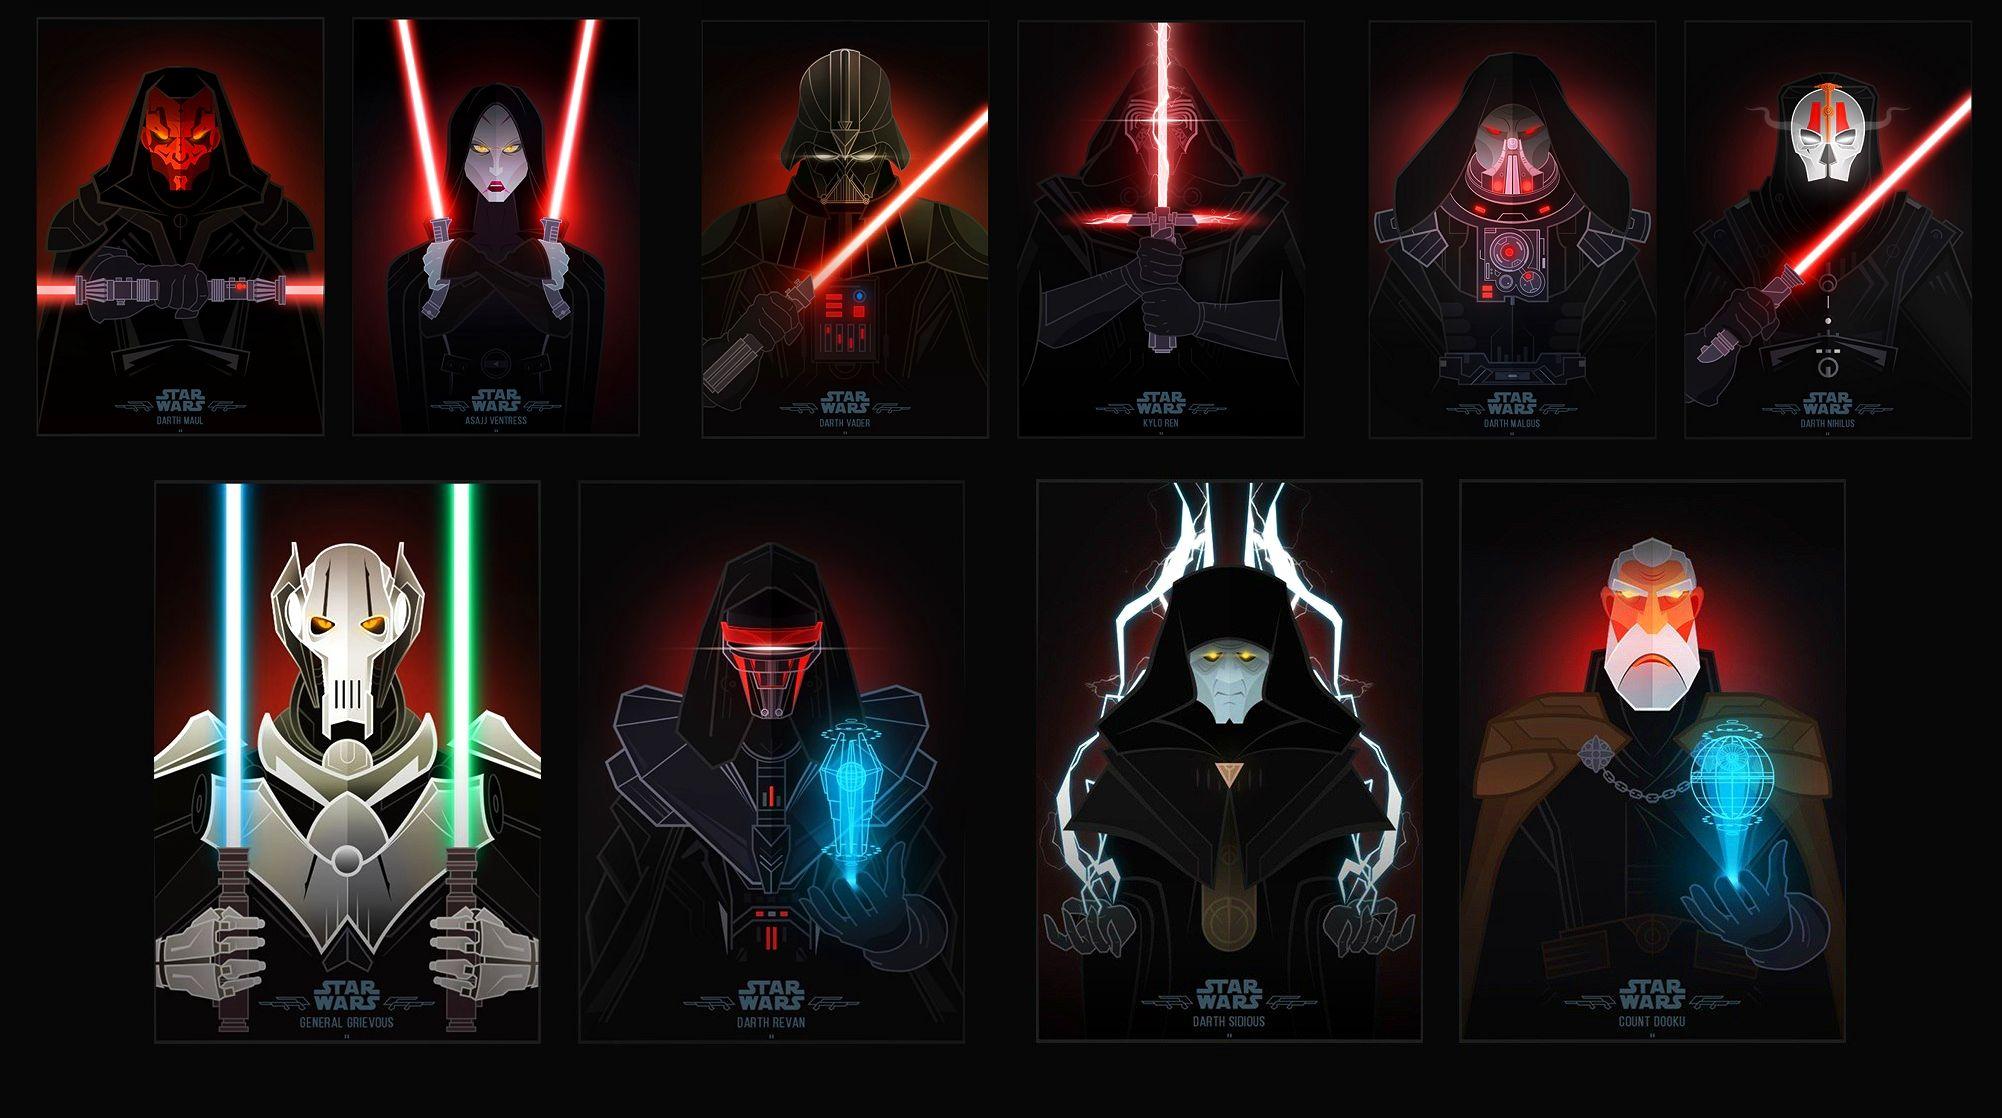 Best Star Wars Sith Wallpaper FULL HD 1920×1080 For PC Background